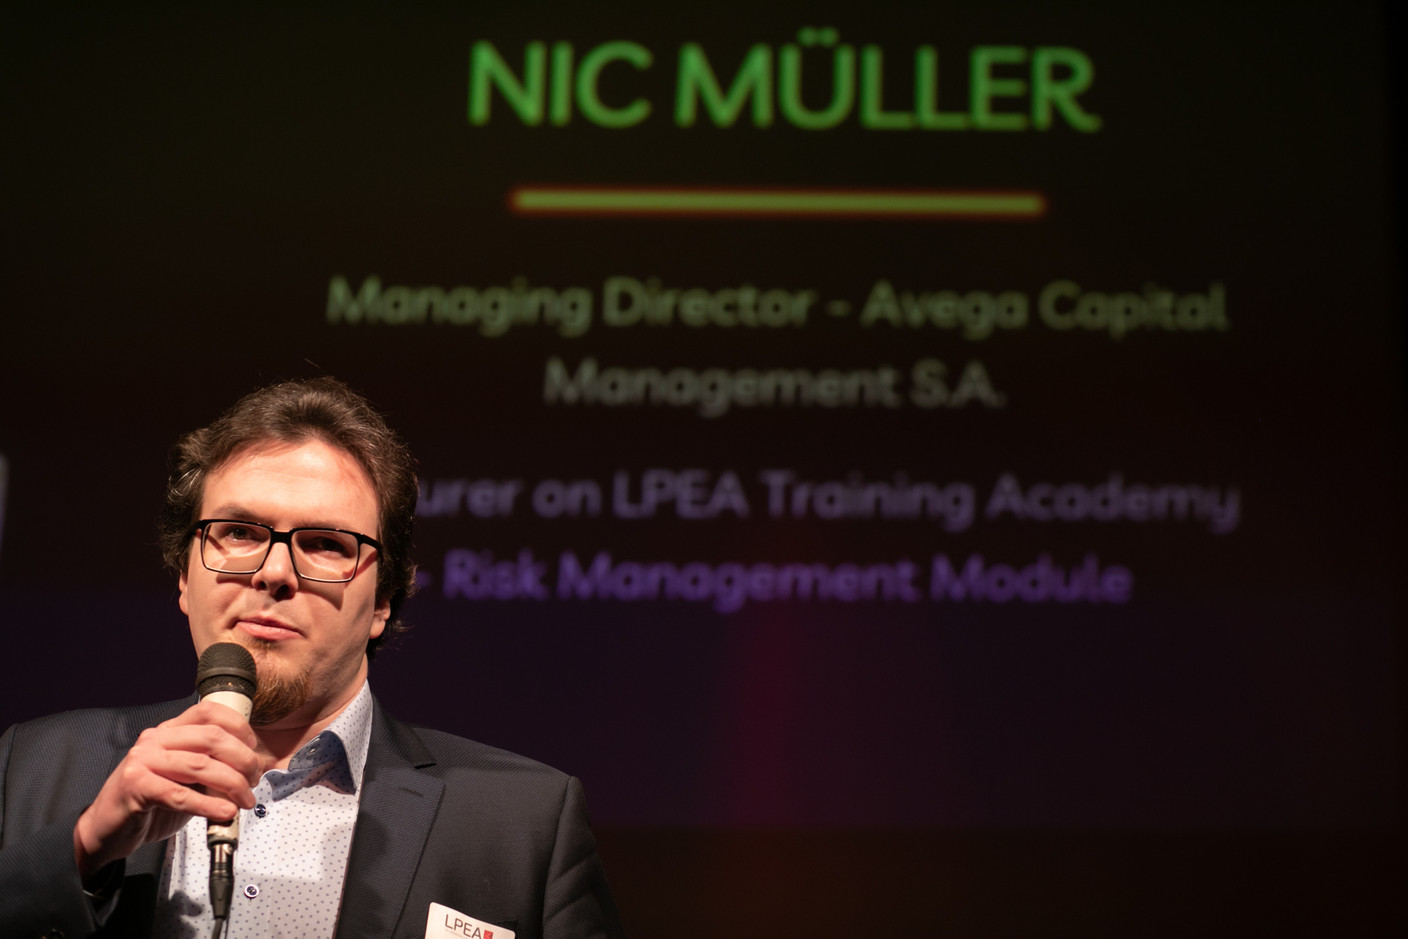 Nic Müller, Avega Capital managing director, speaking at the LPEA's New Year's reception on 19 January 2023 at Melusina. Matic Zorman / Maison Moderne